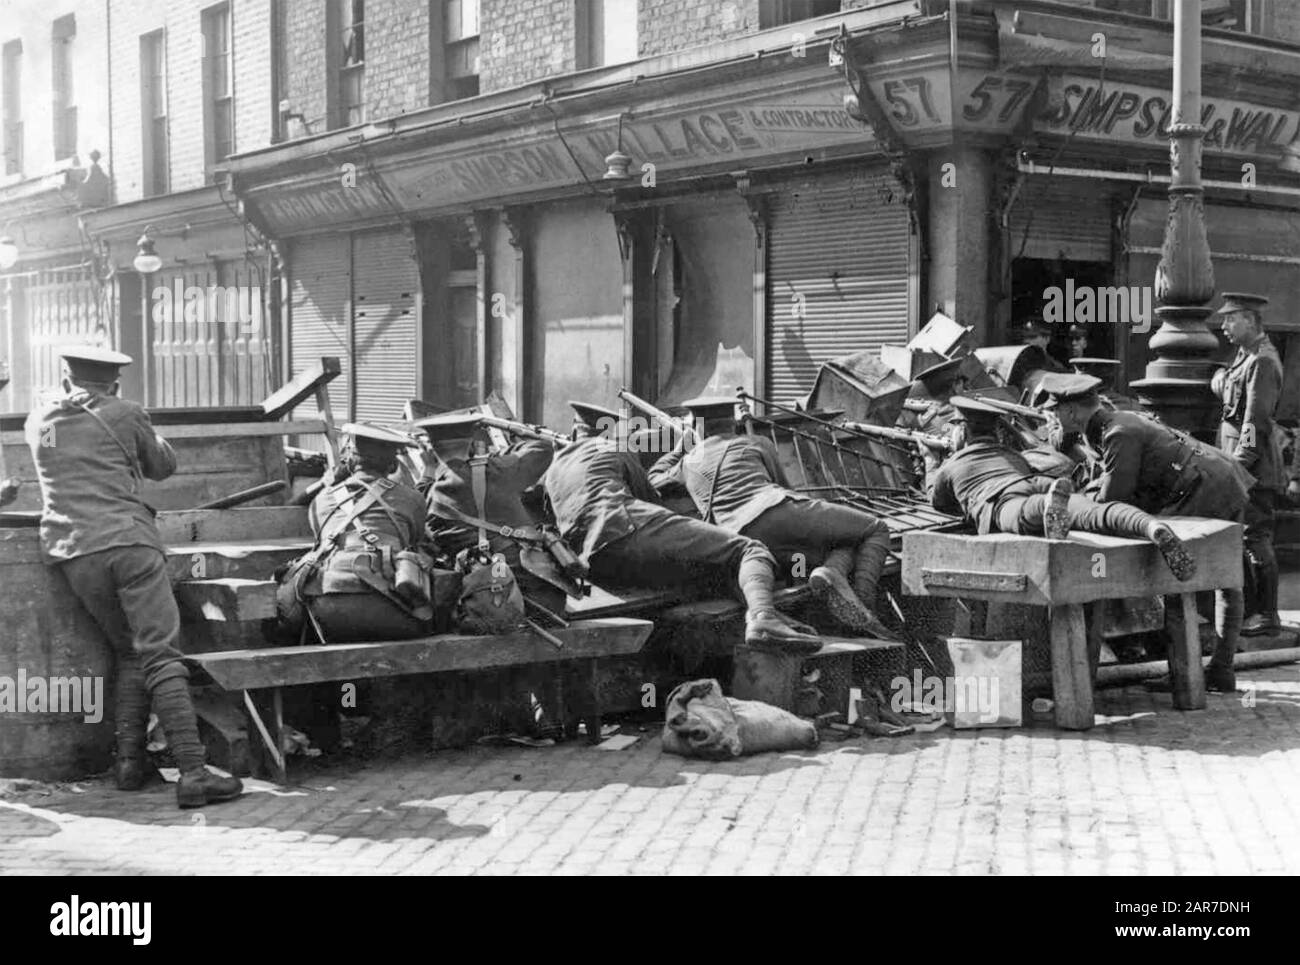 EASTER RISING DUBLIN 1916 British soldiers behind an improvised barricade Stock Photo